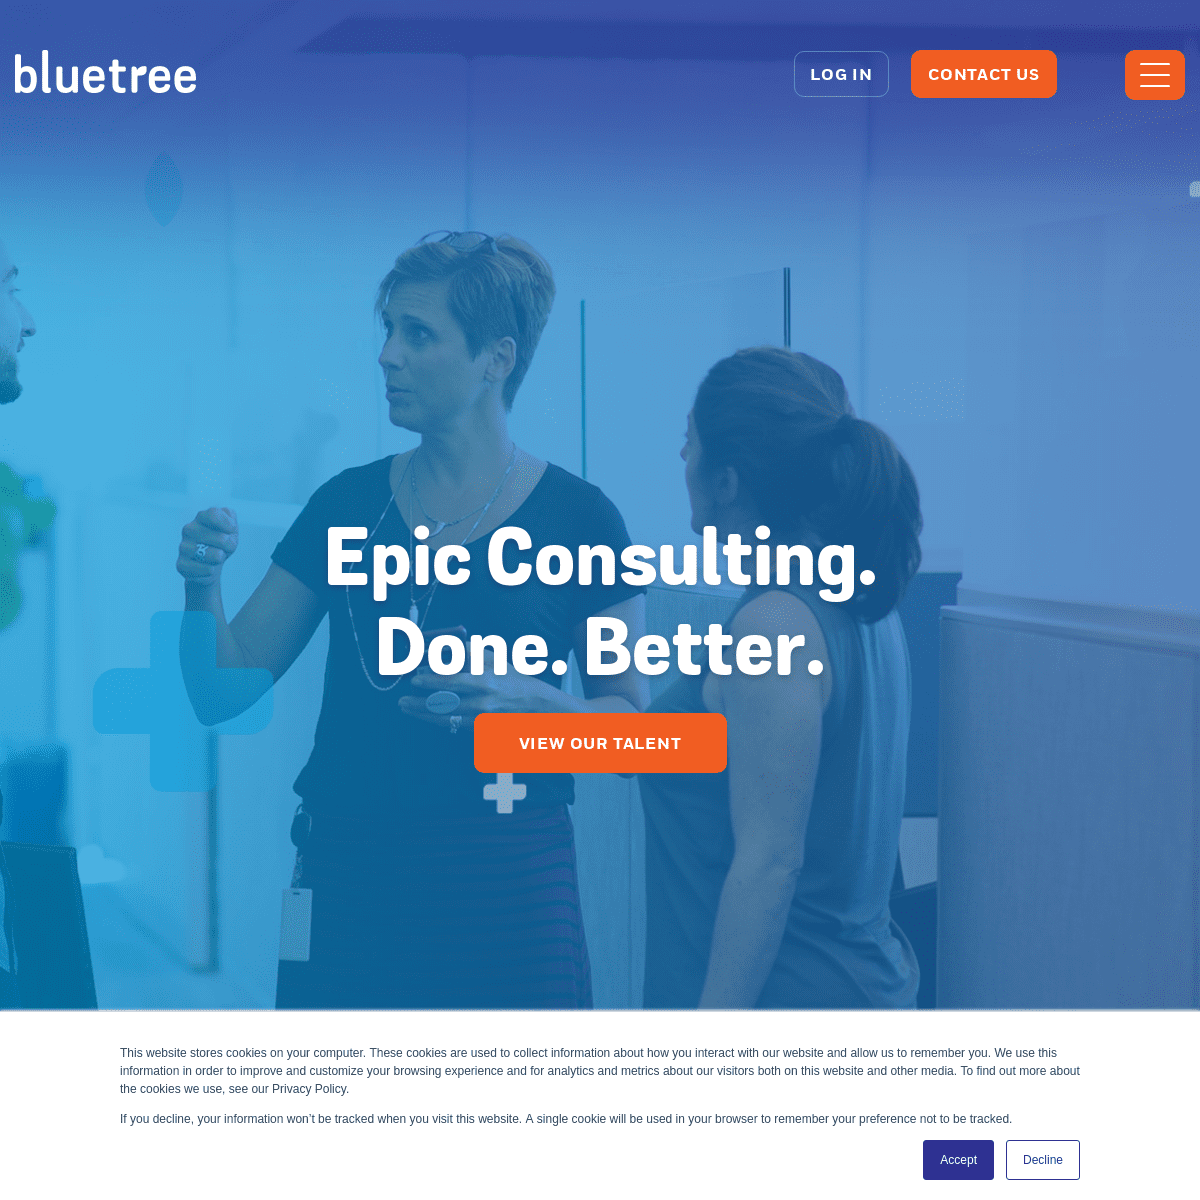 A complete backup of bluetreenetwork.com